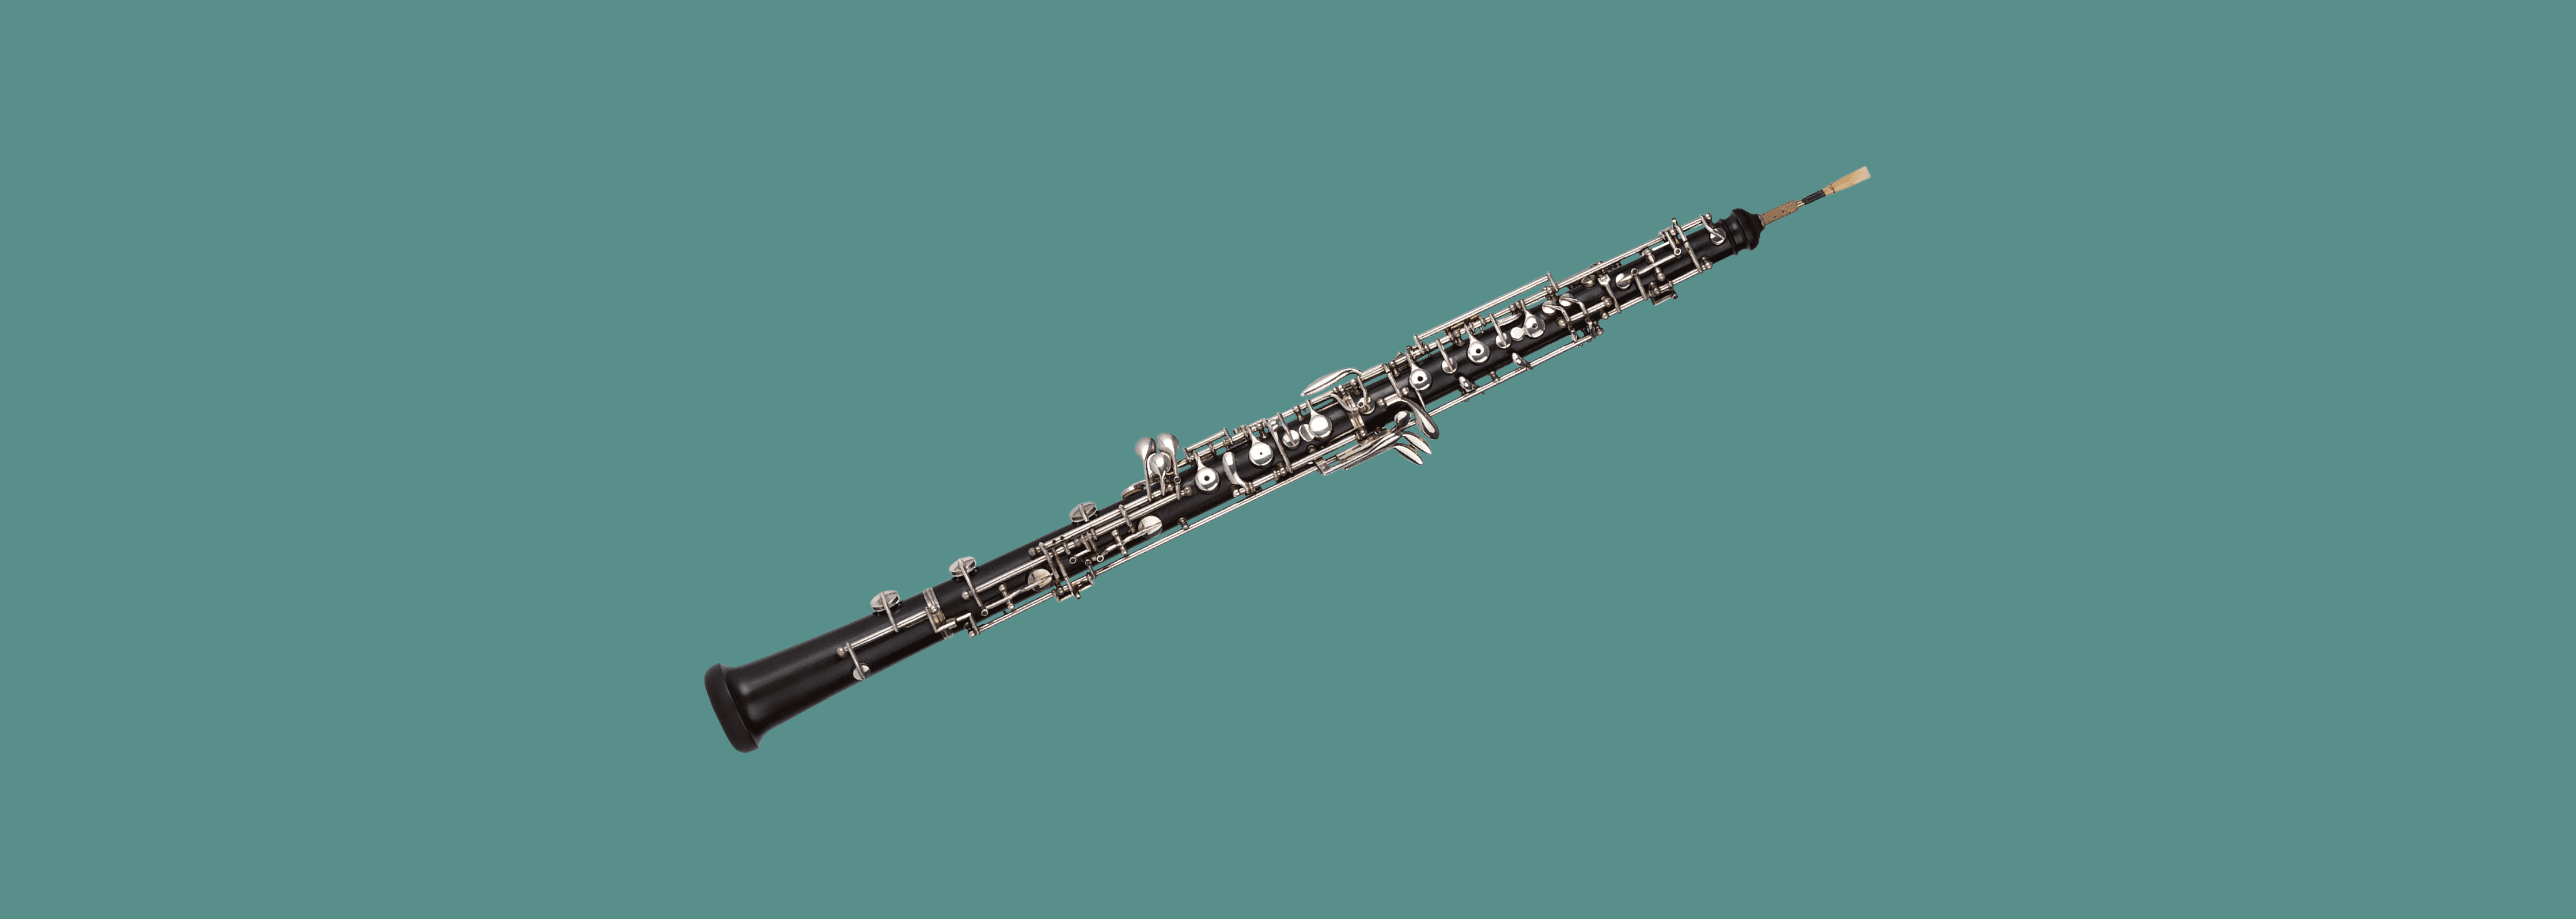 1982 Oboe Amore Available Now!